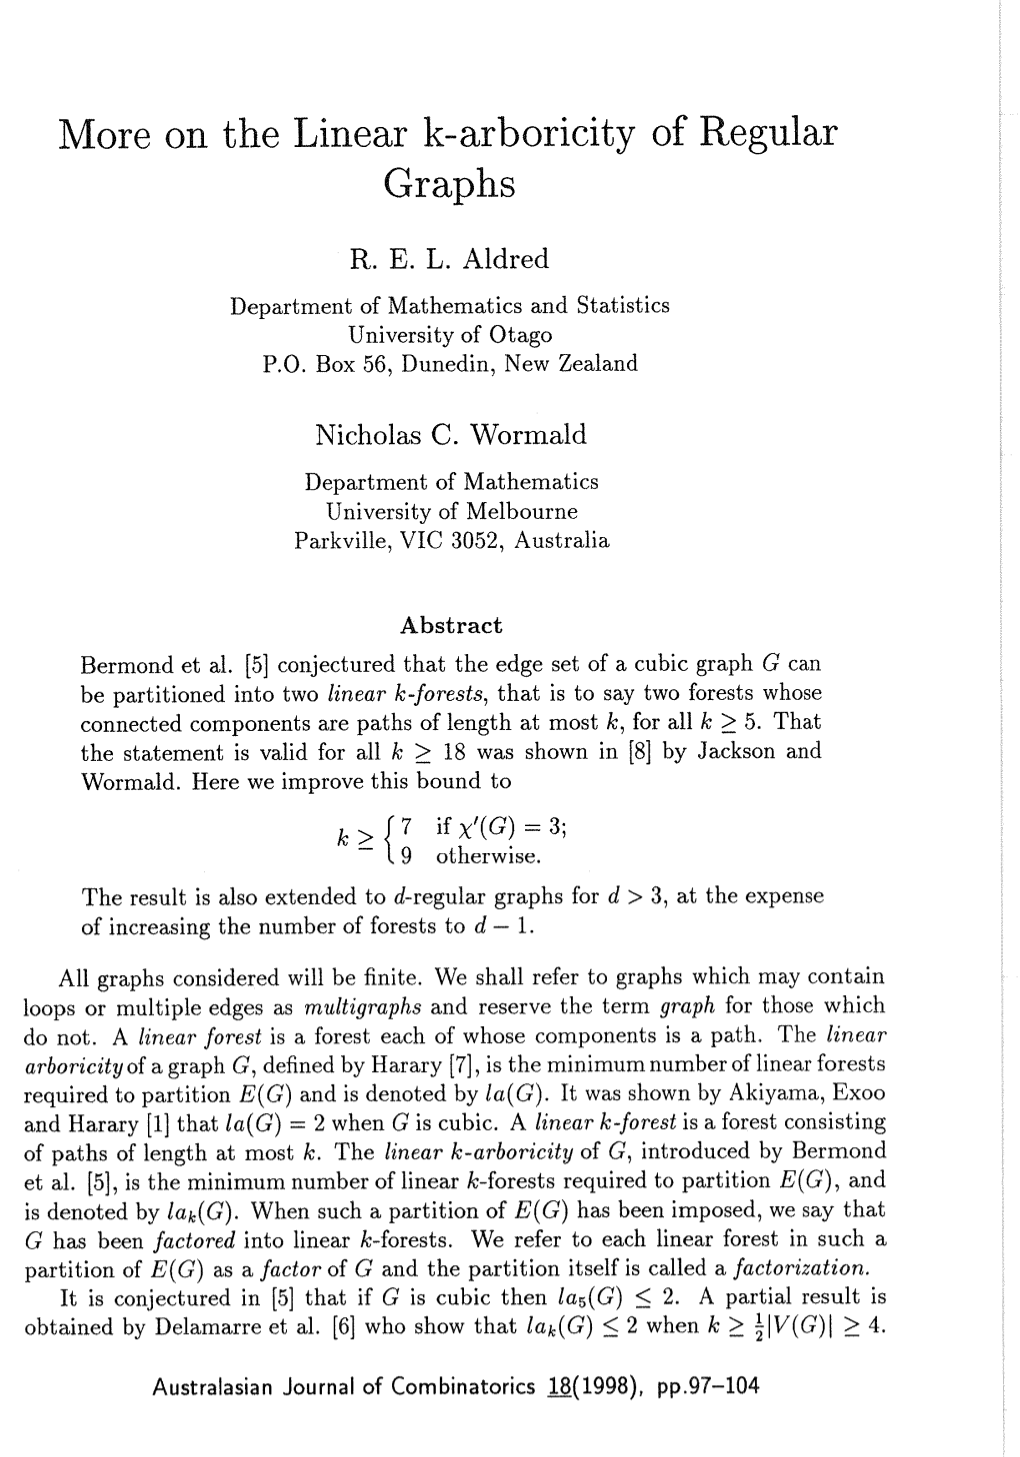 More on the Linear K-Arboricity of Regular Graphs